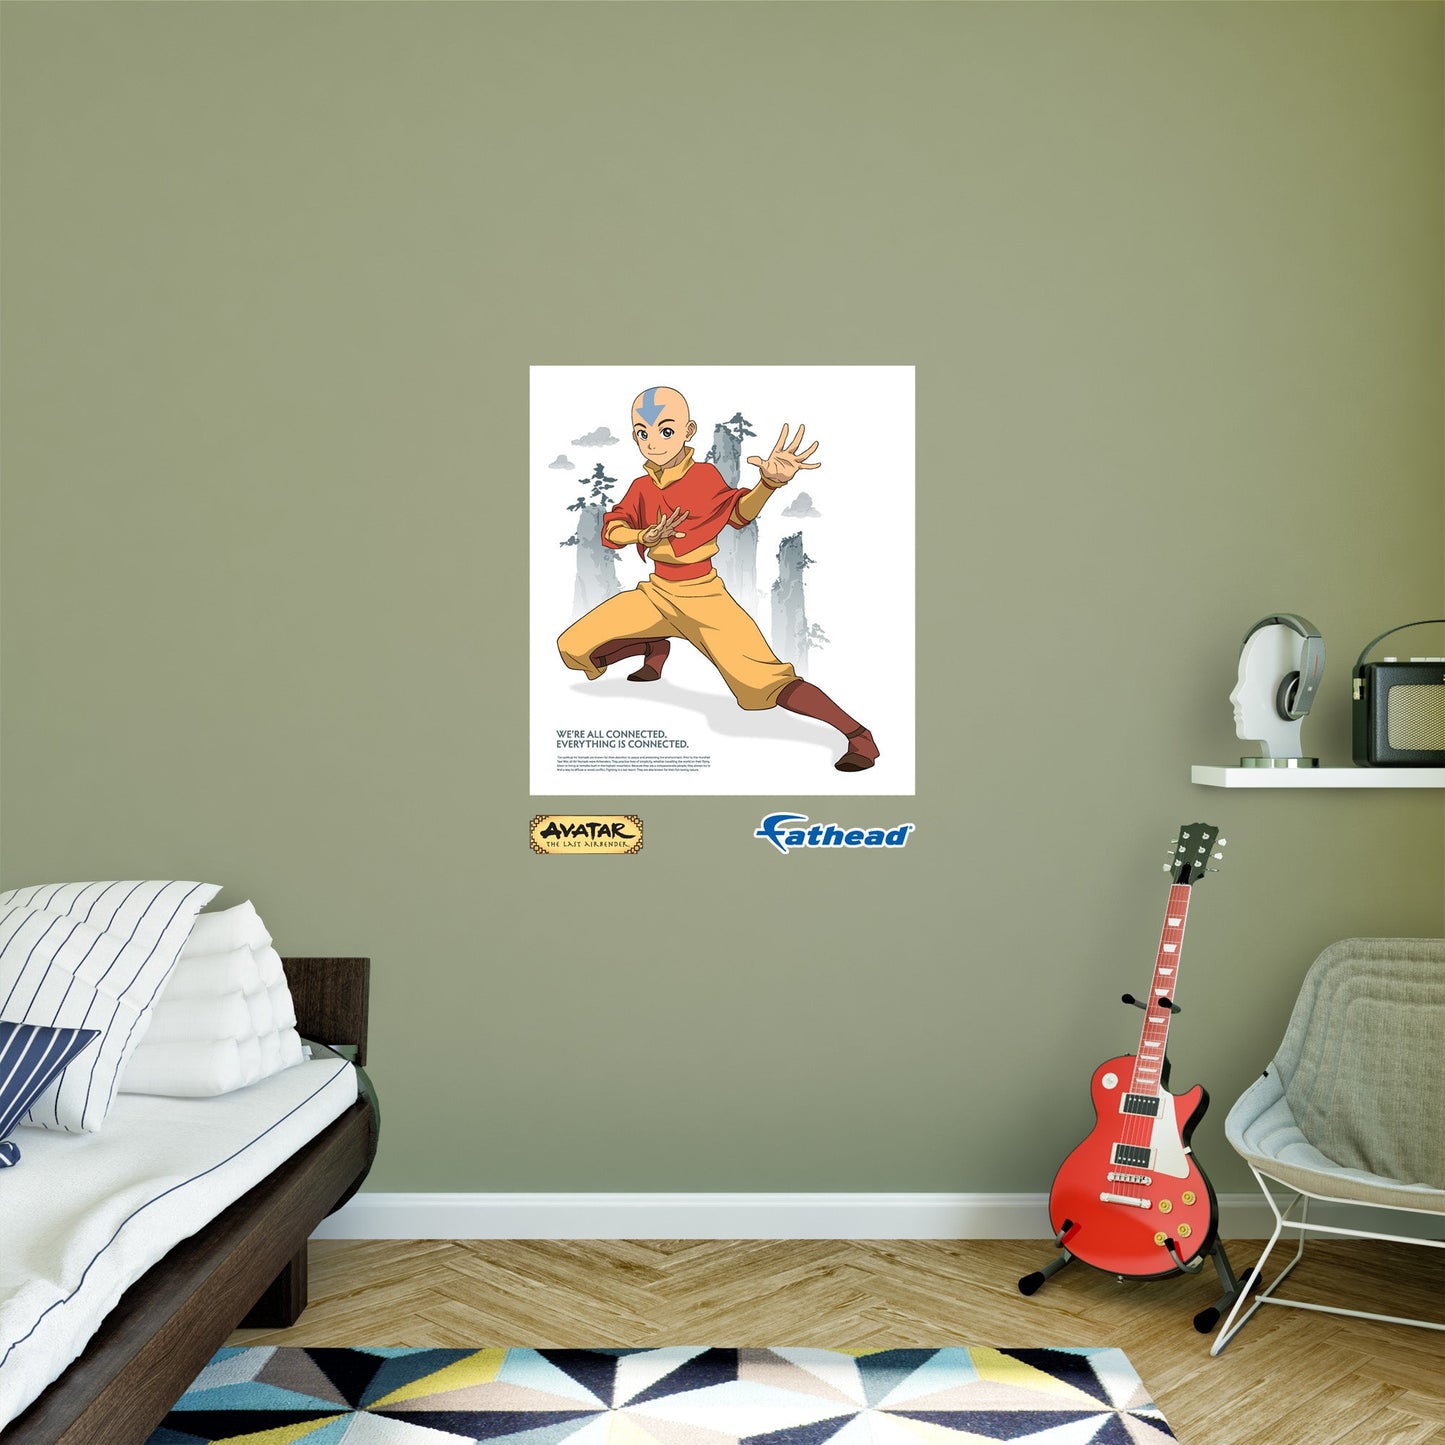 Avatar The Last Airbender: Aang Poster - Officially Licensed Nickelodeon Removable Adhesive Decal